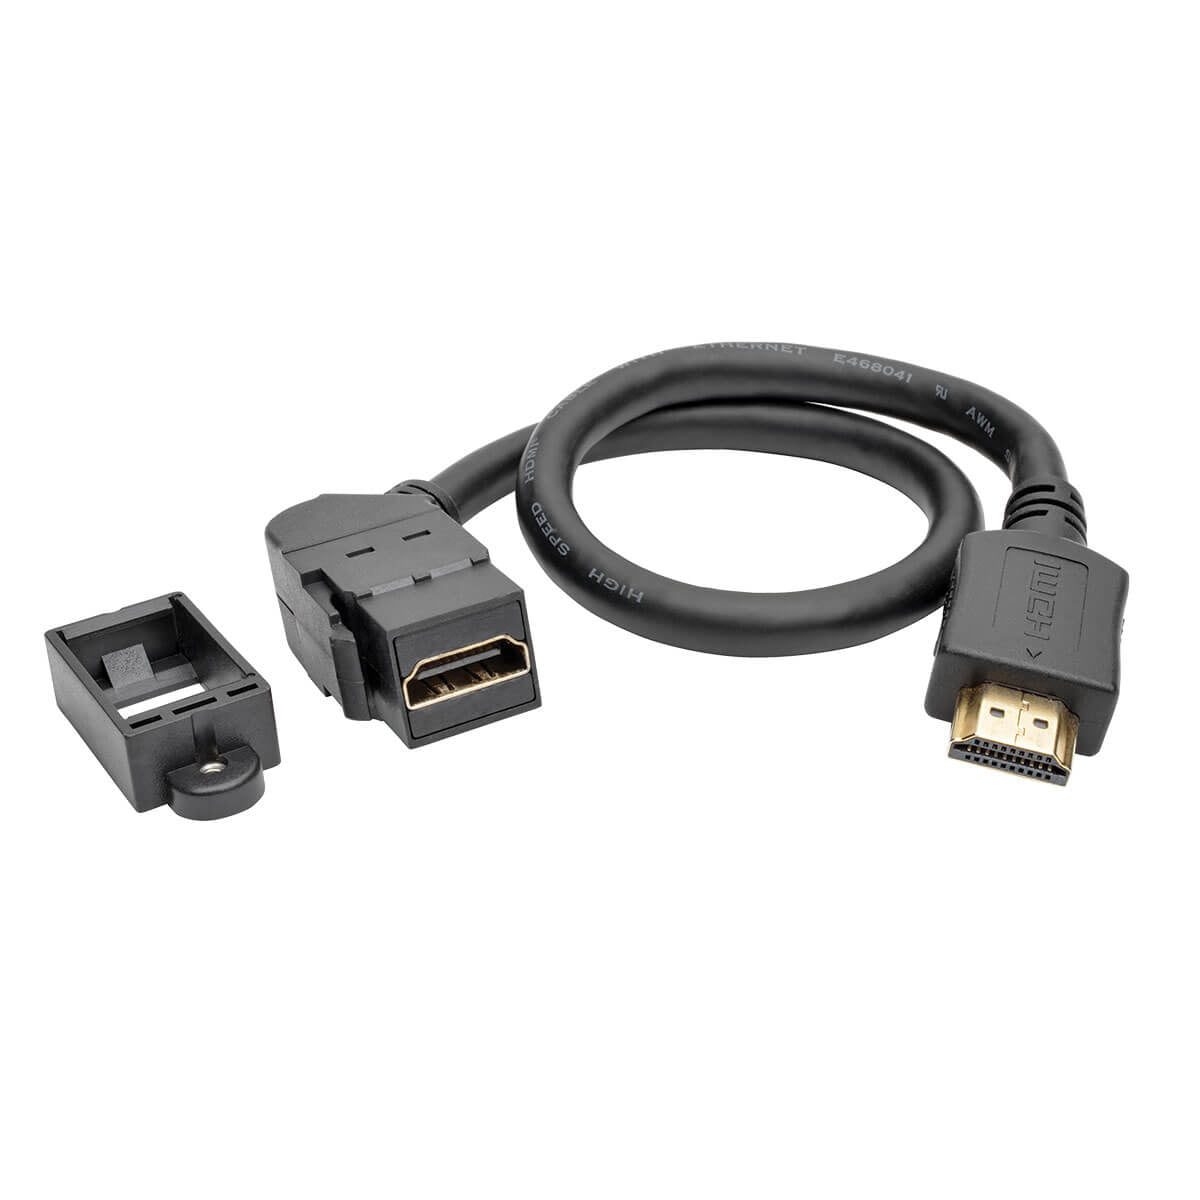 Tripp Lite P162-001-Kpa-Bk High-Speed Hdmi With Ethernet All-In-One Keystone/Panel Mount Extension Cable (M/F), Angled Connector, 1 Ft. (0.31 M)